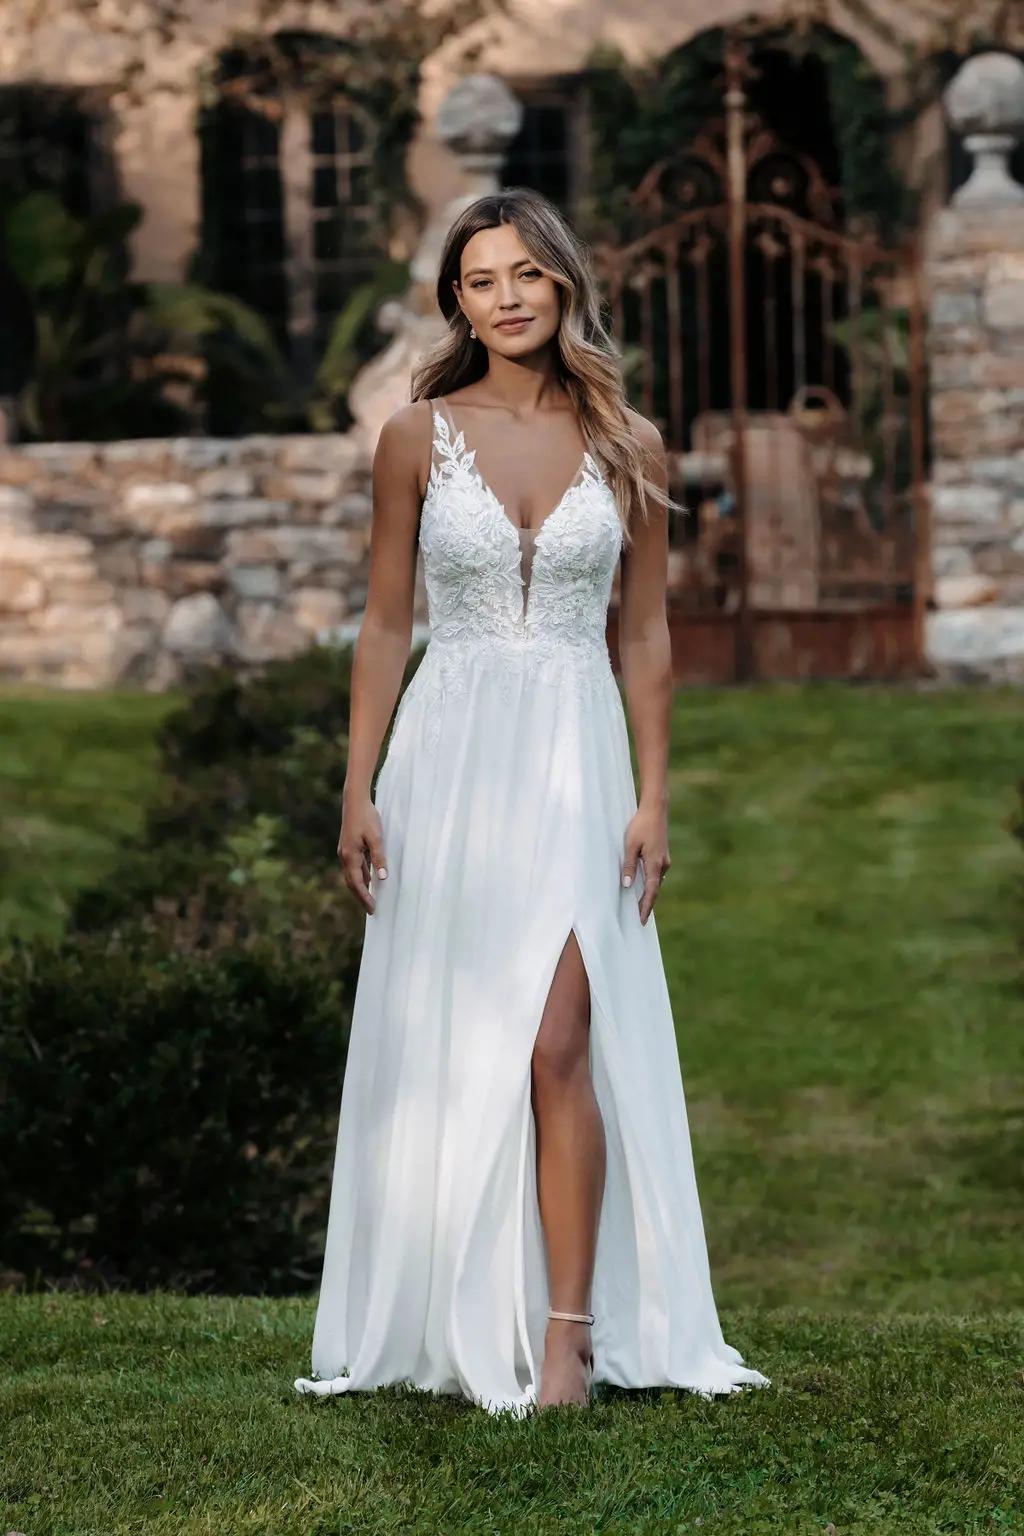 Looking for the Best Bridal Dress in North County? You are at the Right Place. Desktop Image